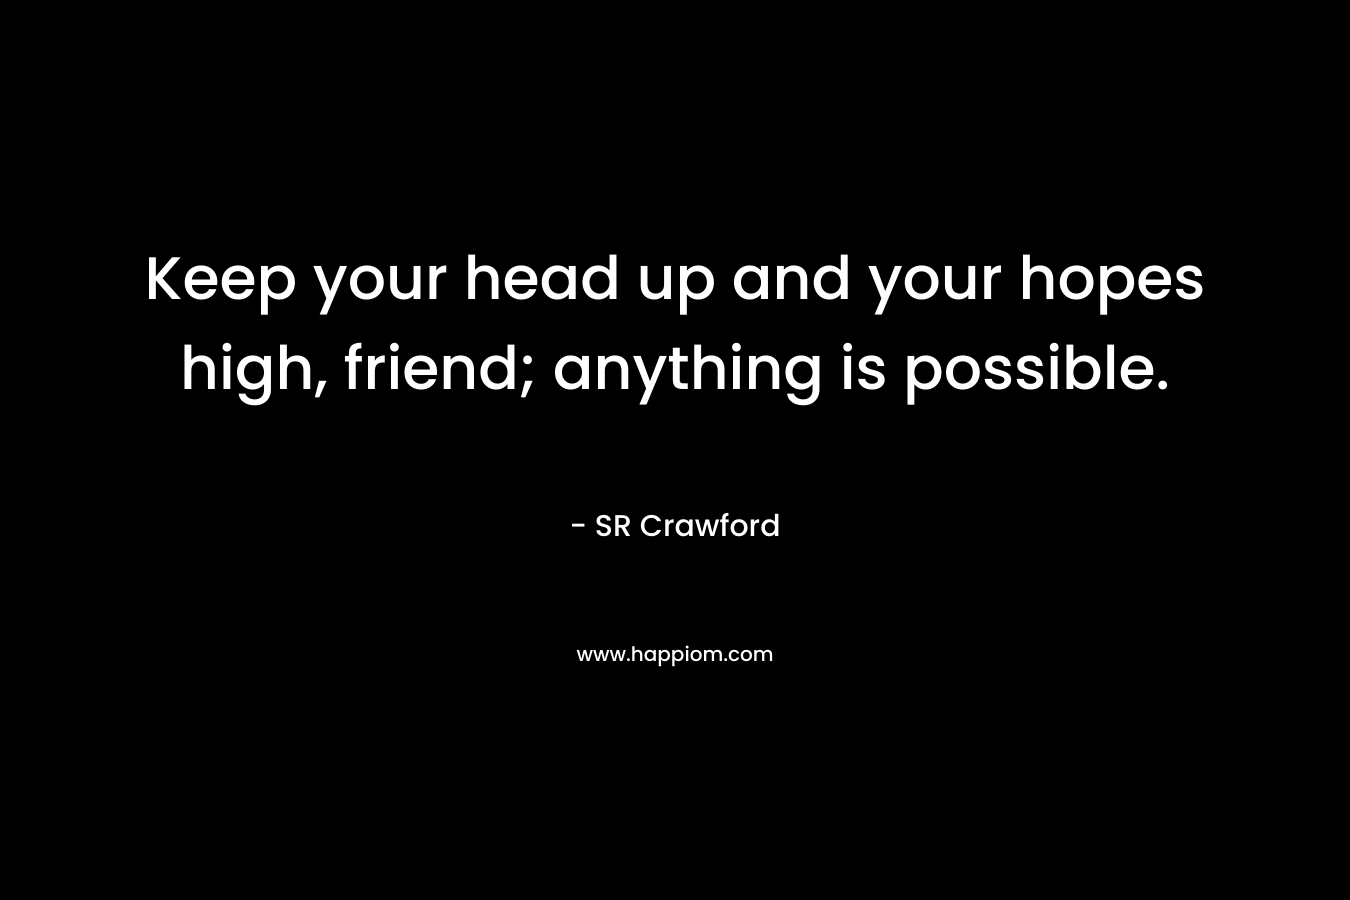 Keep your head up and your hopes high, friend; anything is possible. – SR Crawford